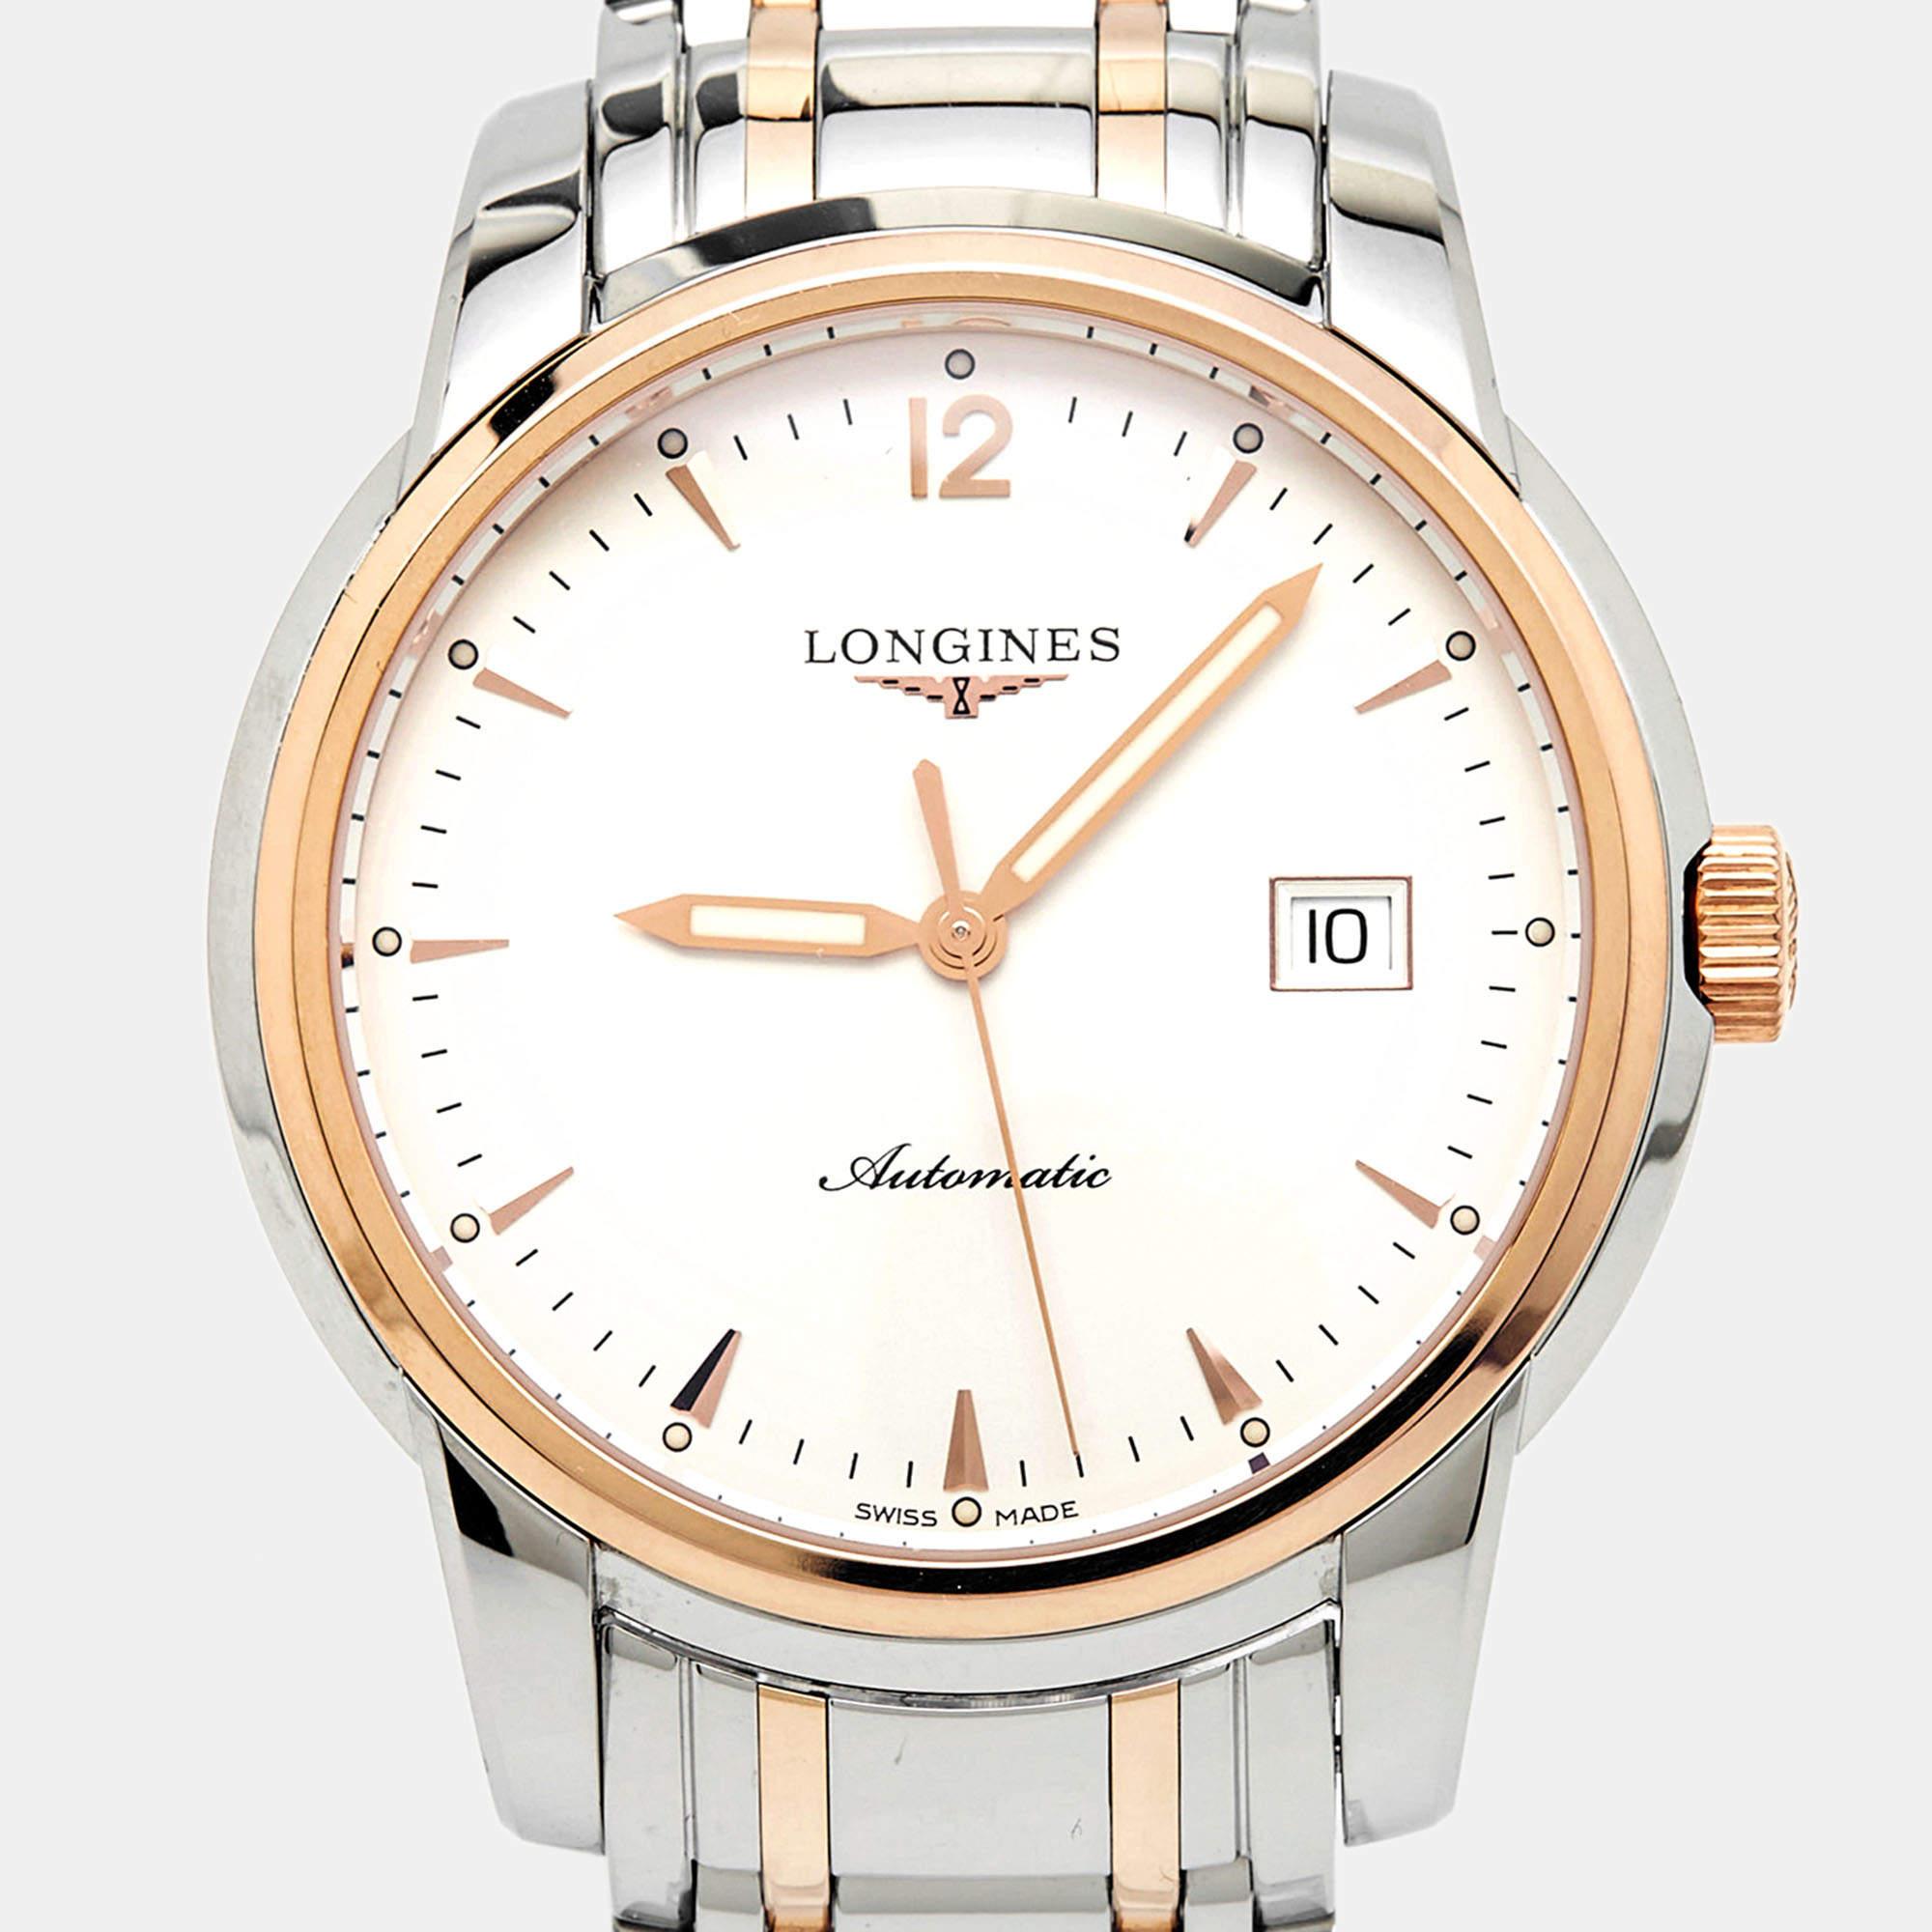 The Longines Saint-Imier is a distinguished men's wristwatch featuring a harmonious blend of 18K rose gold, and stainless steel. This refined timepiece showcases exquisite craftsmanship, precision movement, and timeless design, epitomizing Longines'